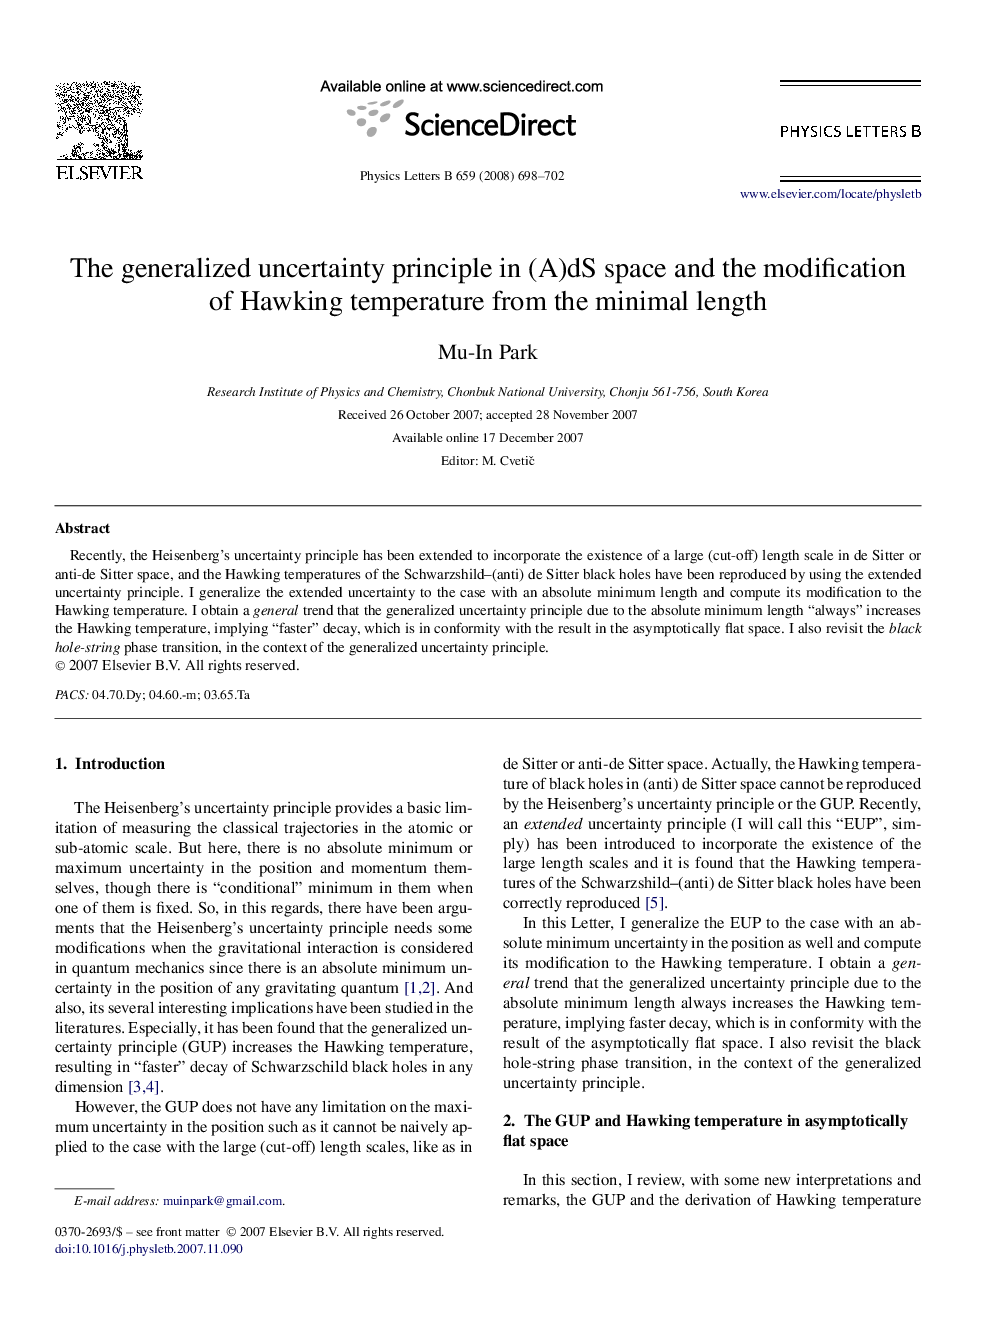 The generalized uncertainty principle in (A)dS space and the modification of Hawking temperature from the minimal length